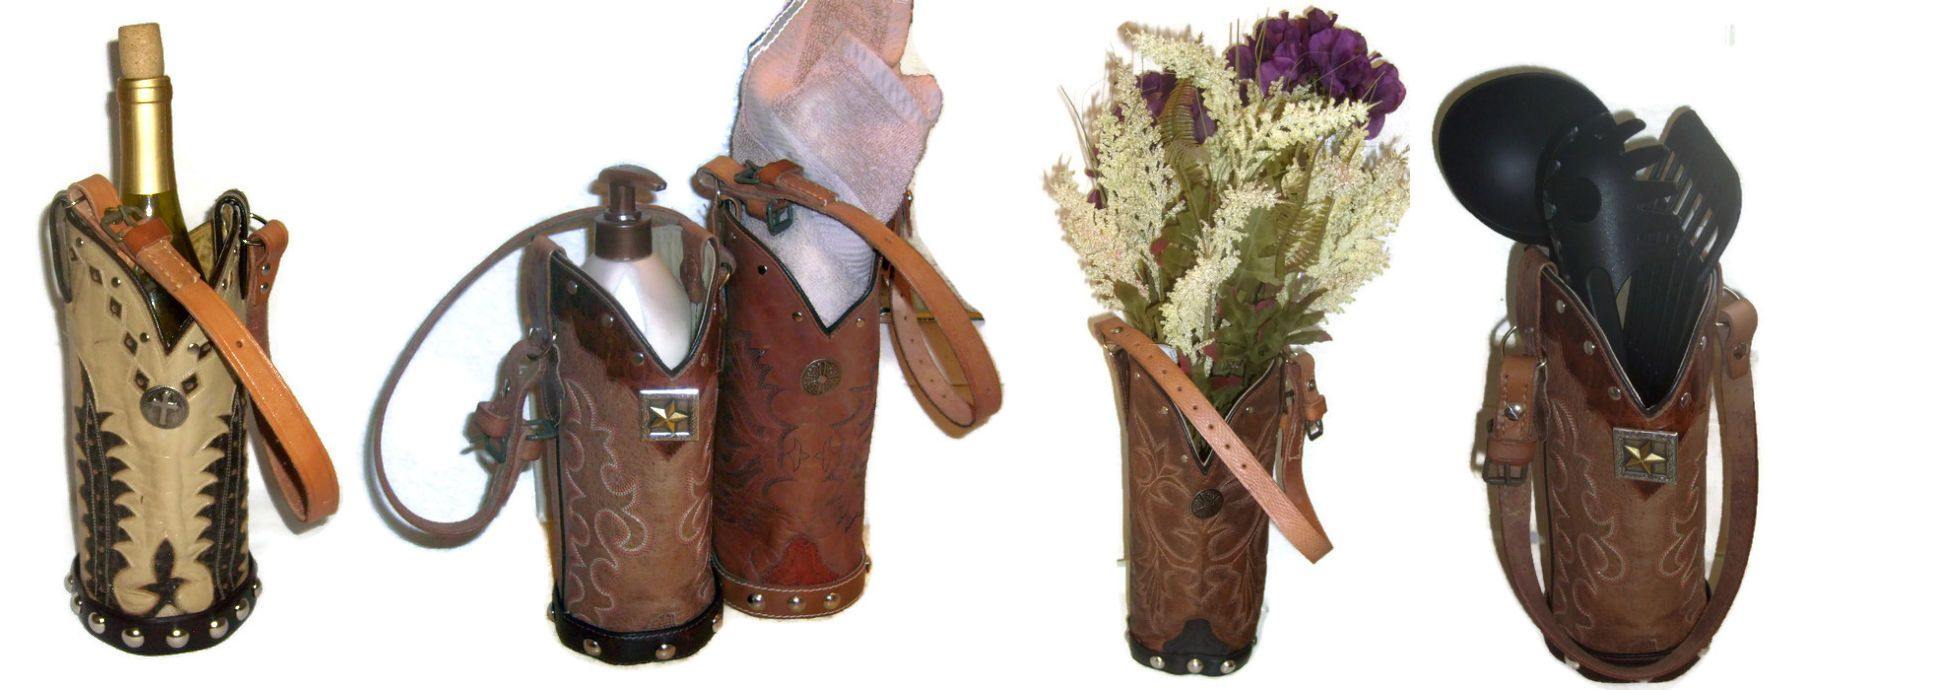 Double Wine Tote Bag - Leather Wine Carrier - Wine Lovers Gift – Wine Bag PP30 cowboy boot purses, western fringe purse, handmade leather purses, boot purse, handmade western purse, custom leather handbags Chris Thompson Bags